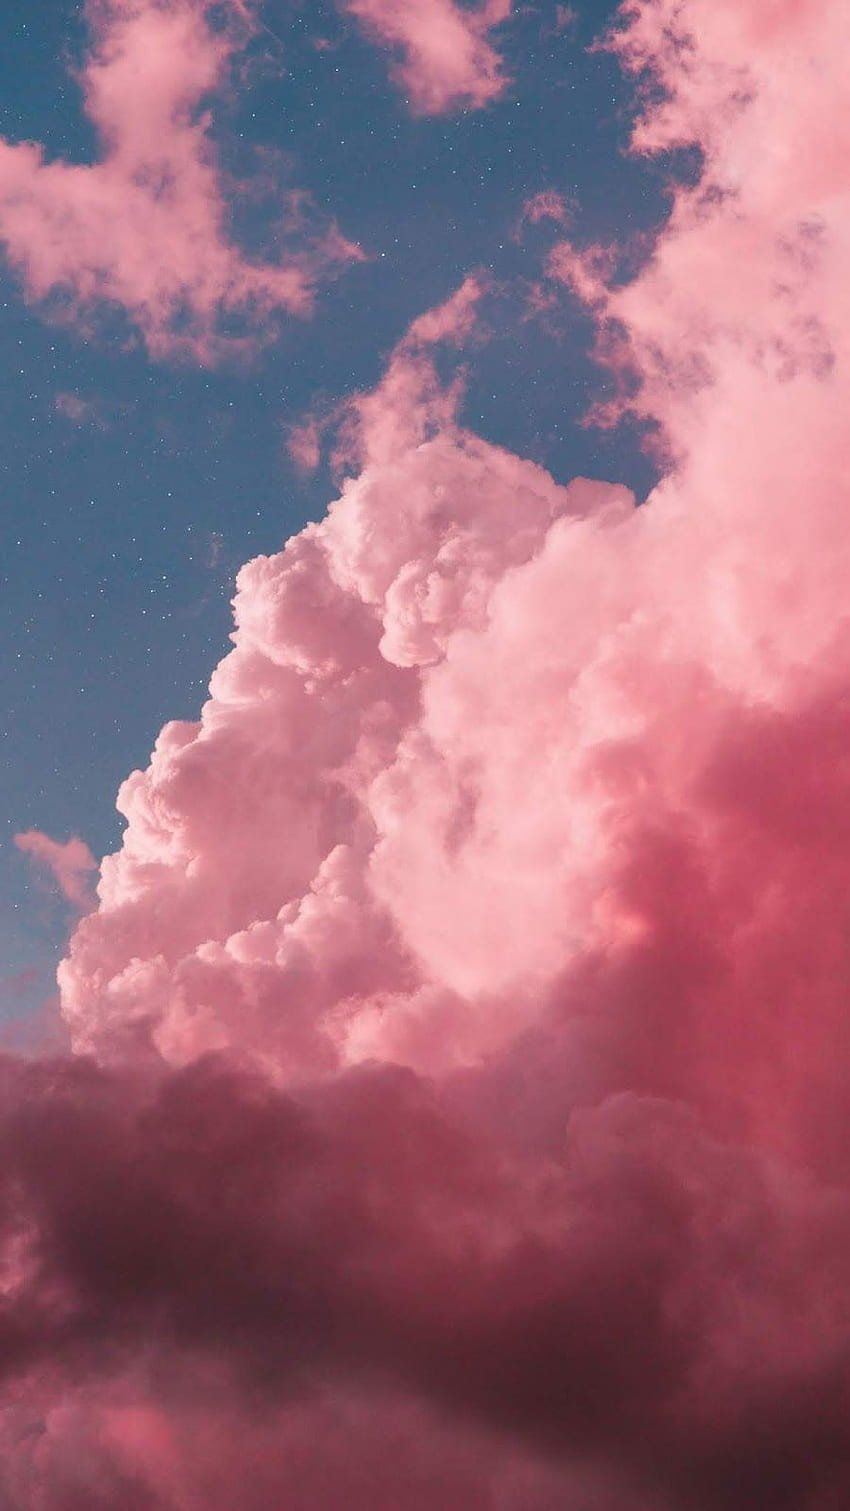 Pink clouds in the sky - Aries